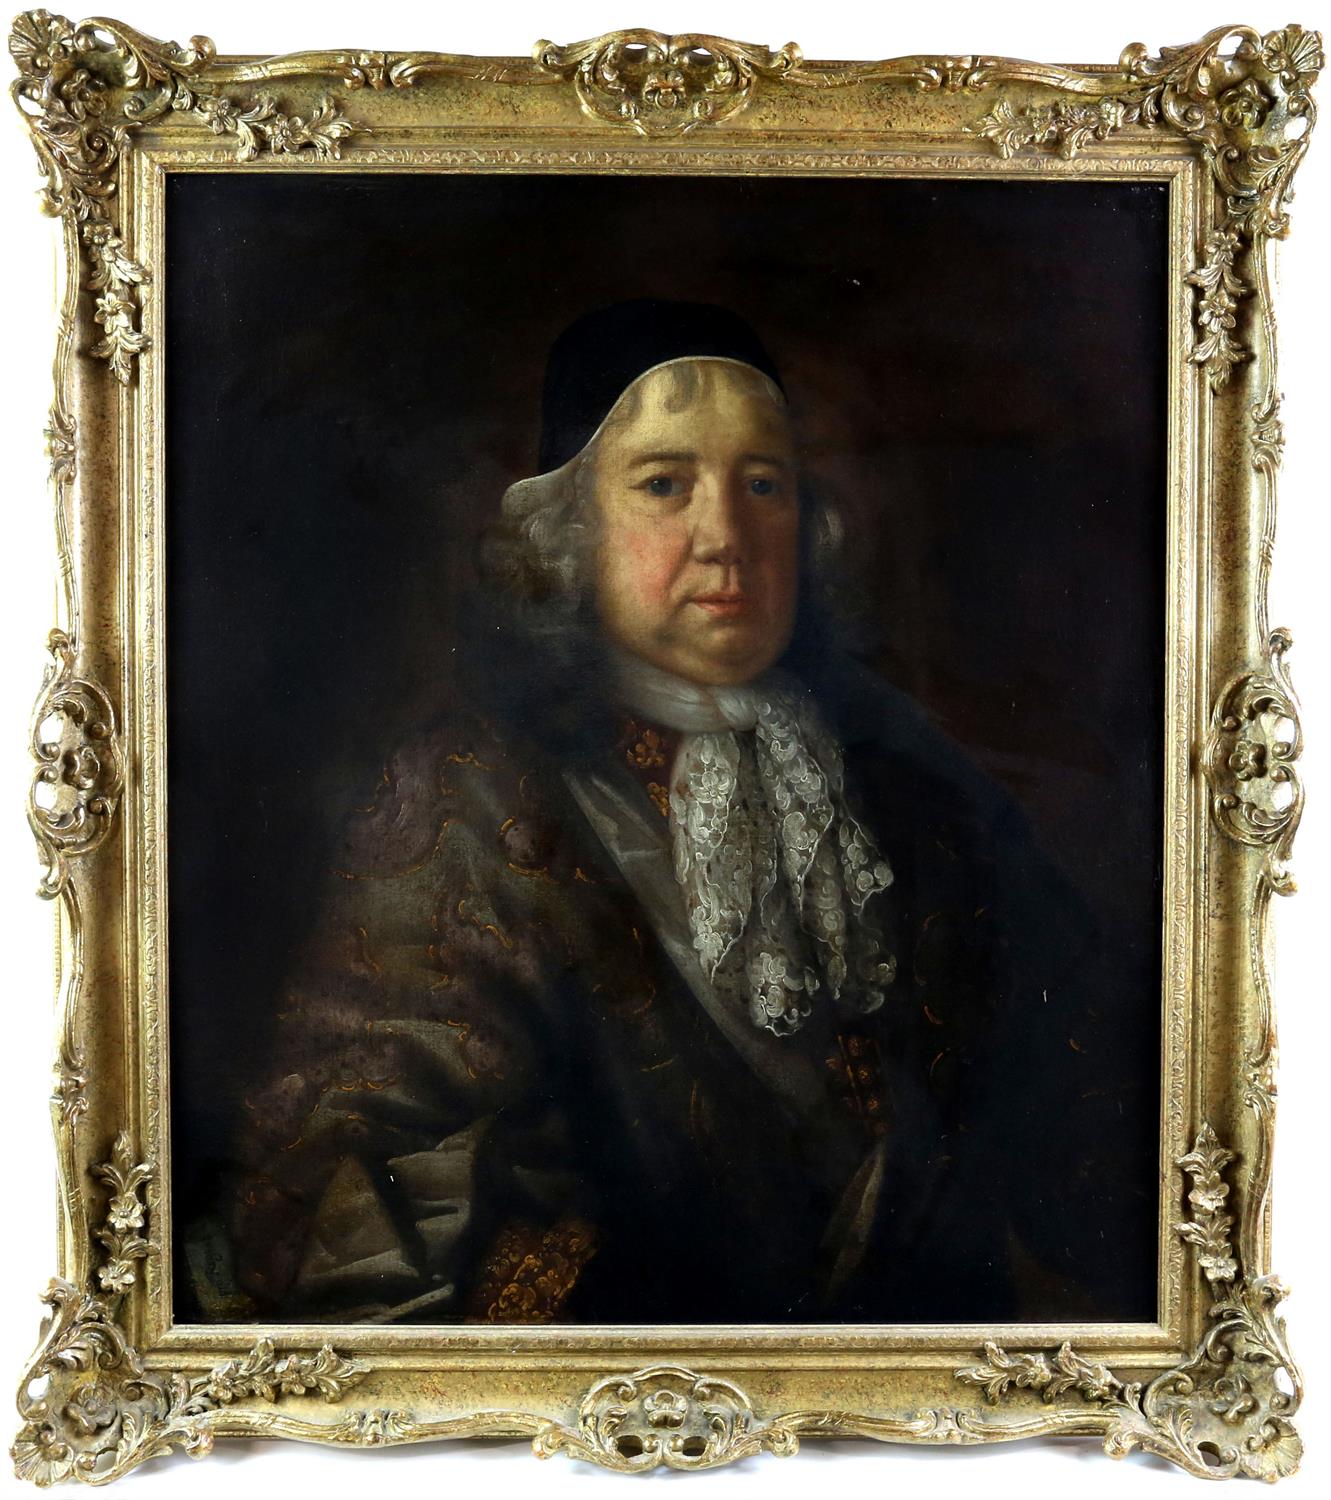 17th / 18th century British school, portrait of a gentleman wearing cap and a lace cravat, - Image 2 of 4